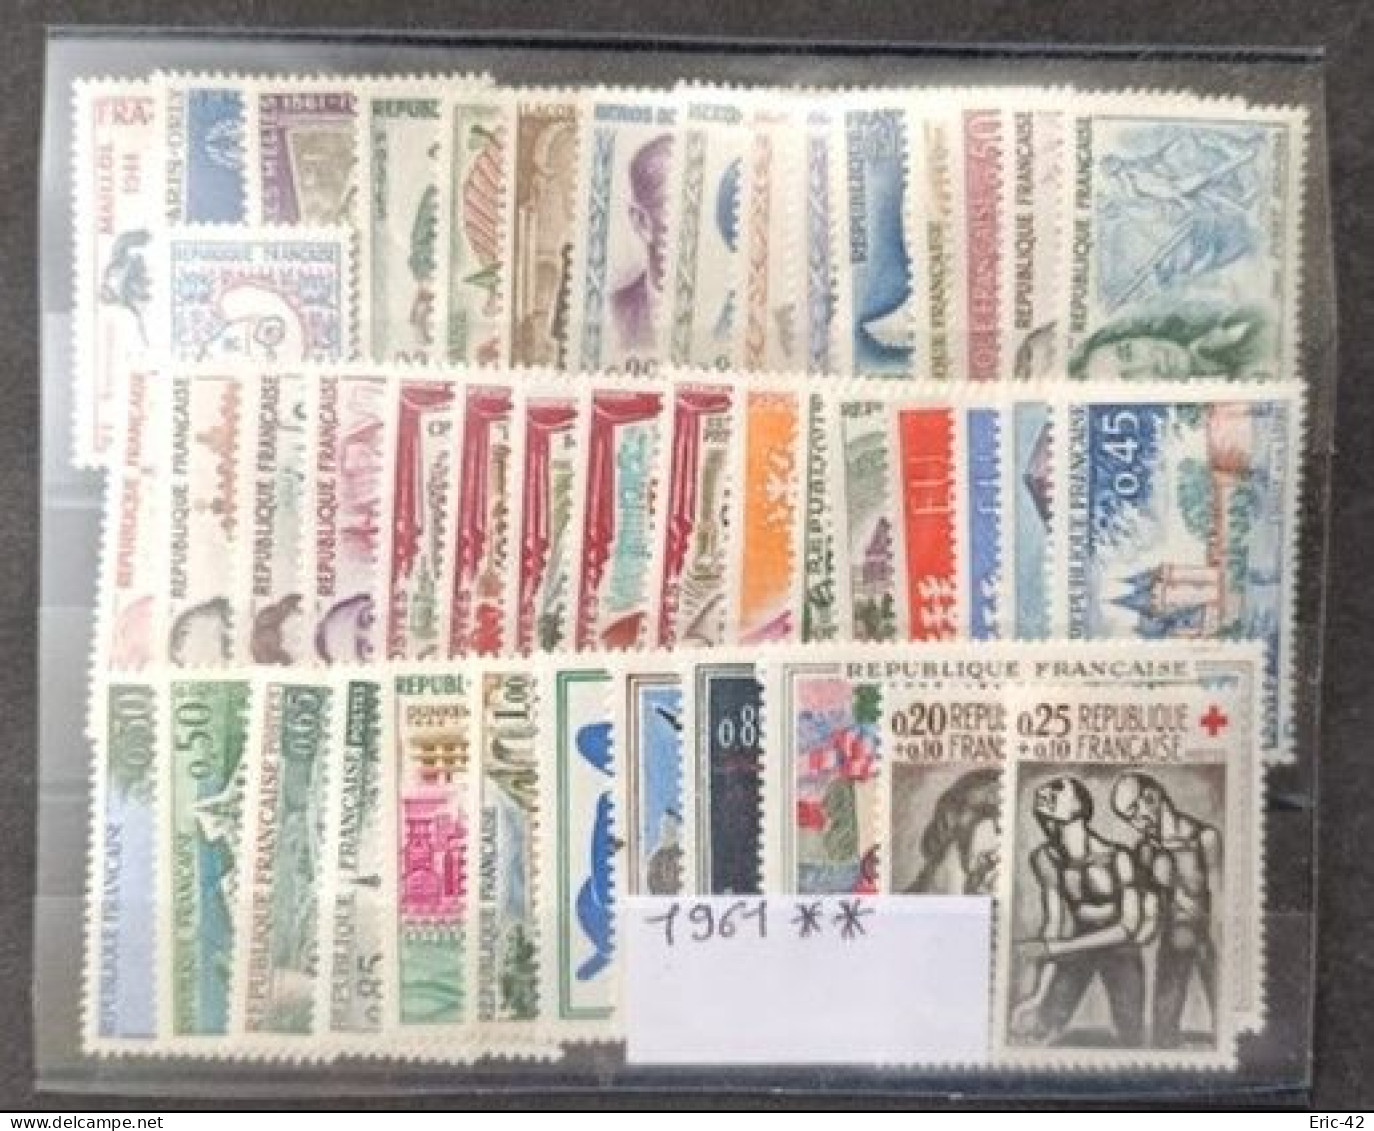 ANNEE 1961 COMPLETE (44 Timbres) NEUF** MNH - 1960-1969